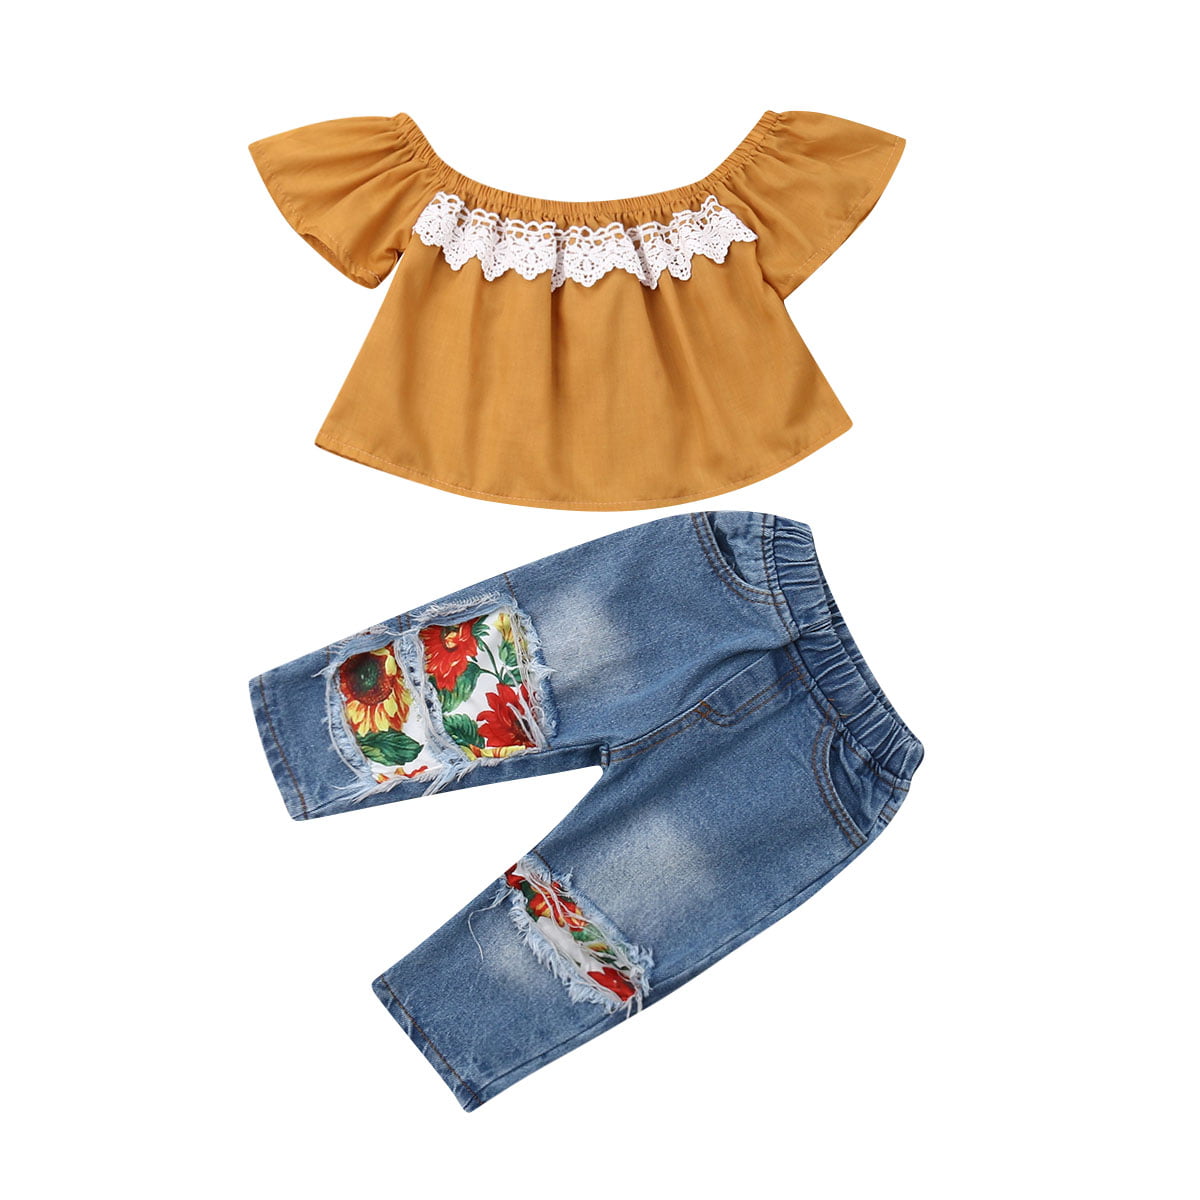 Toddler Baby Girls Clothes Set Short Sleeve Lace T-Shirt Tops with Ripped Denim Jeans Pants 2Pcs Outfit